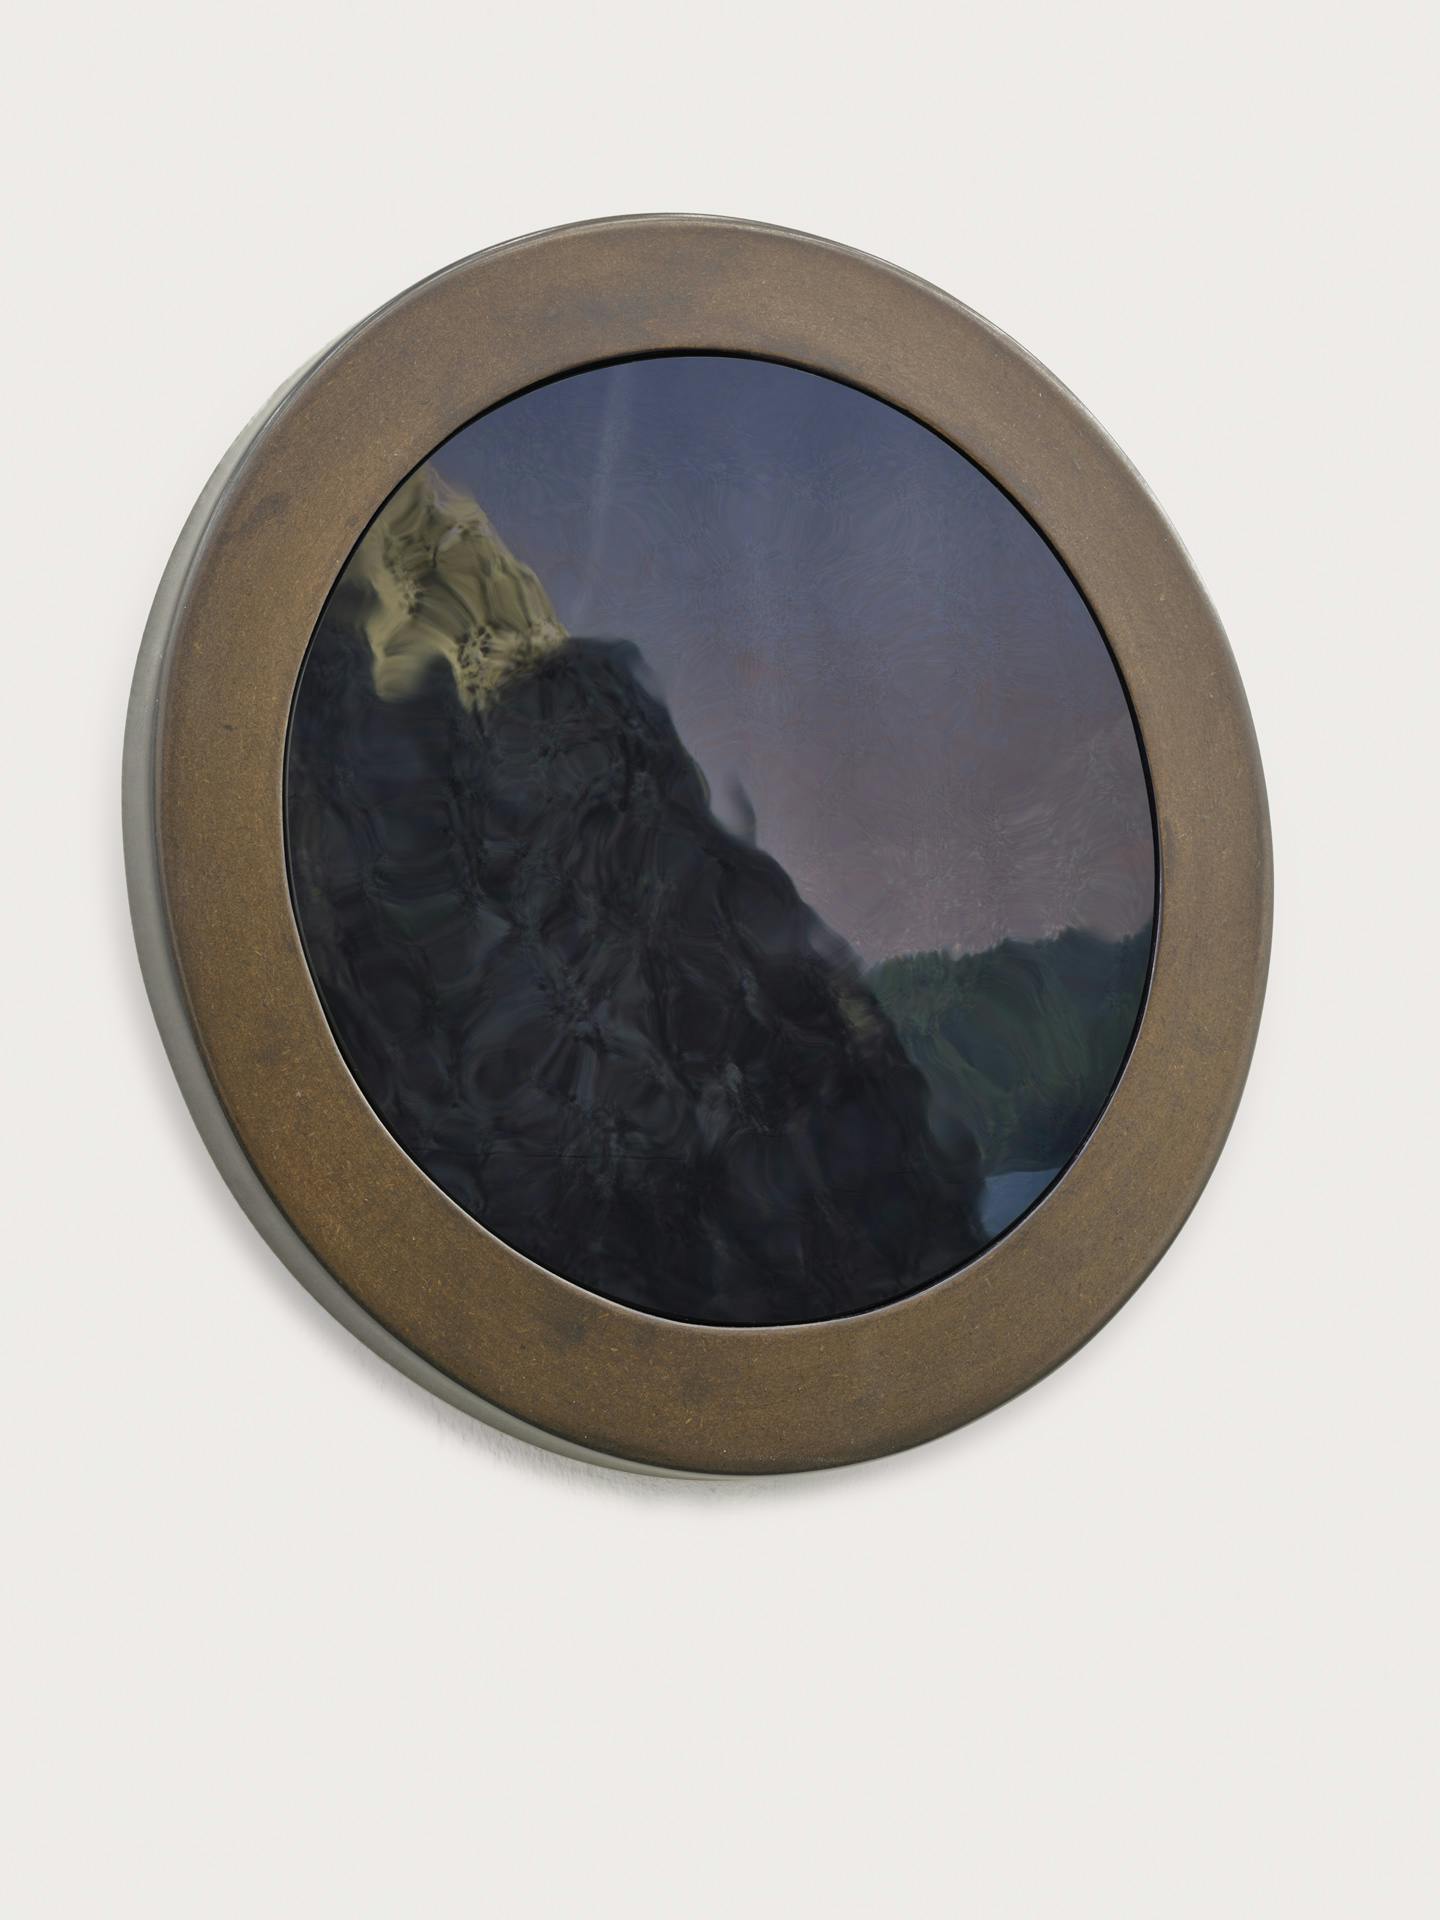 A framed black mirror by Kathy Slade reflecting a tapestry depicting a large rock.